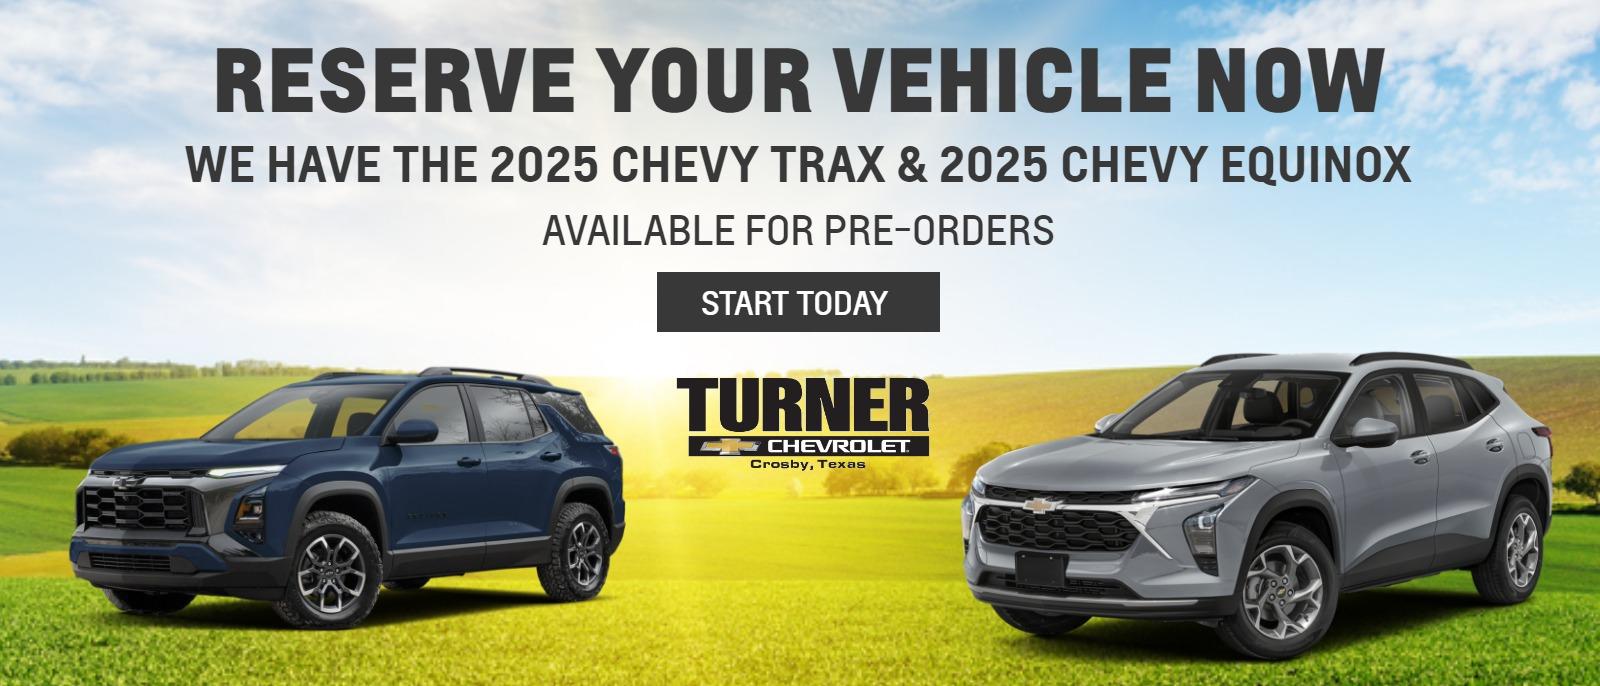 RESERVE YOUR VEHICLE NOW
We have the 2025 Chevy Trax & 2025 Chevy Equinox
available for pre-orders